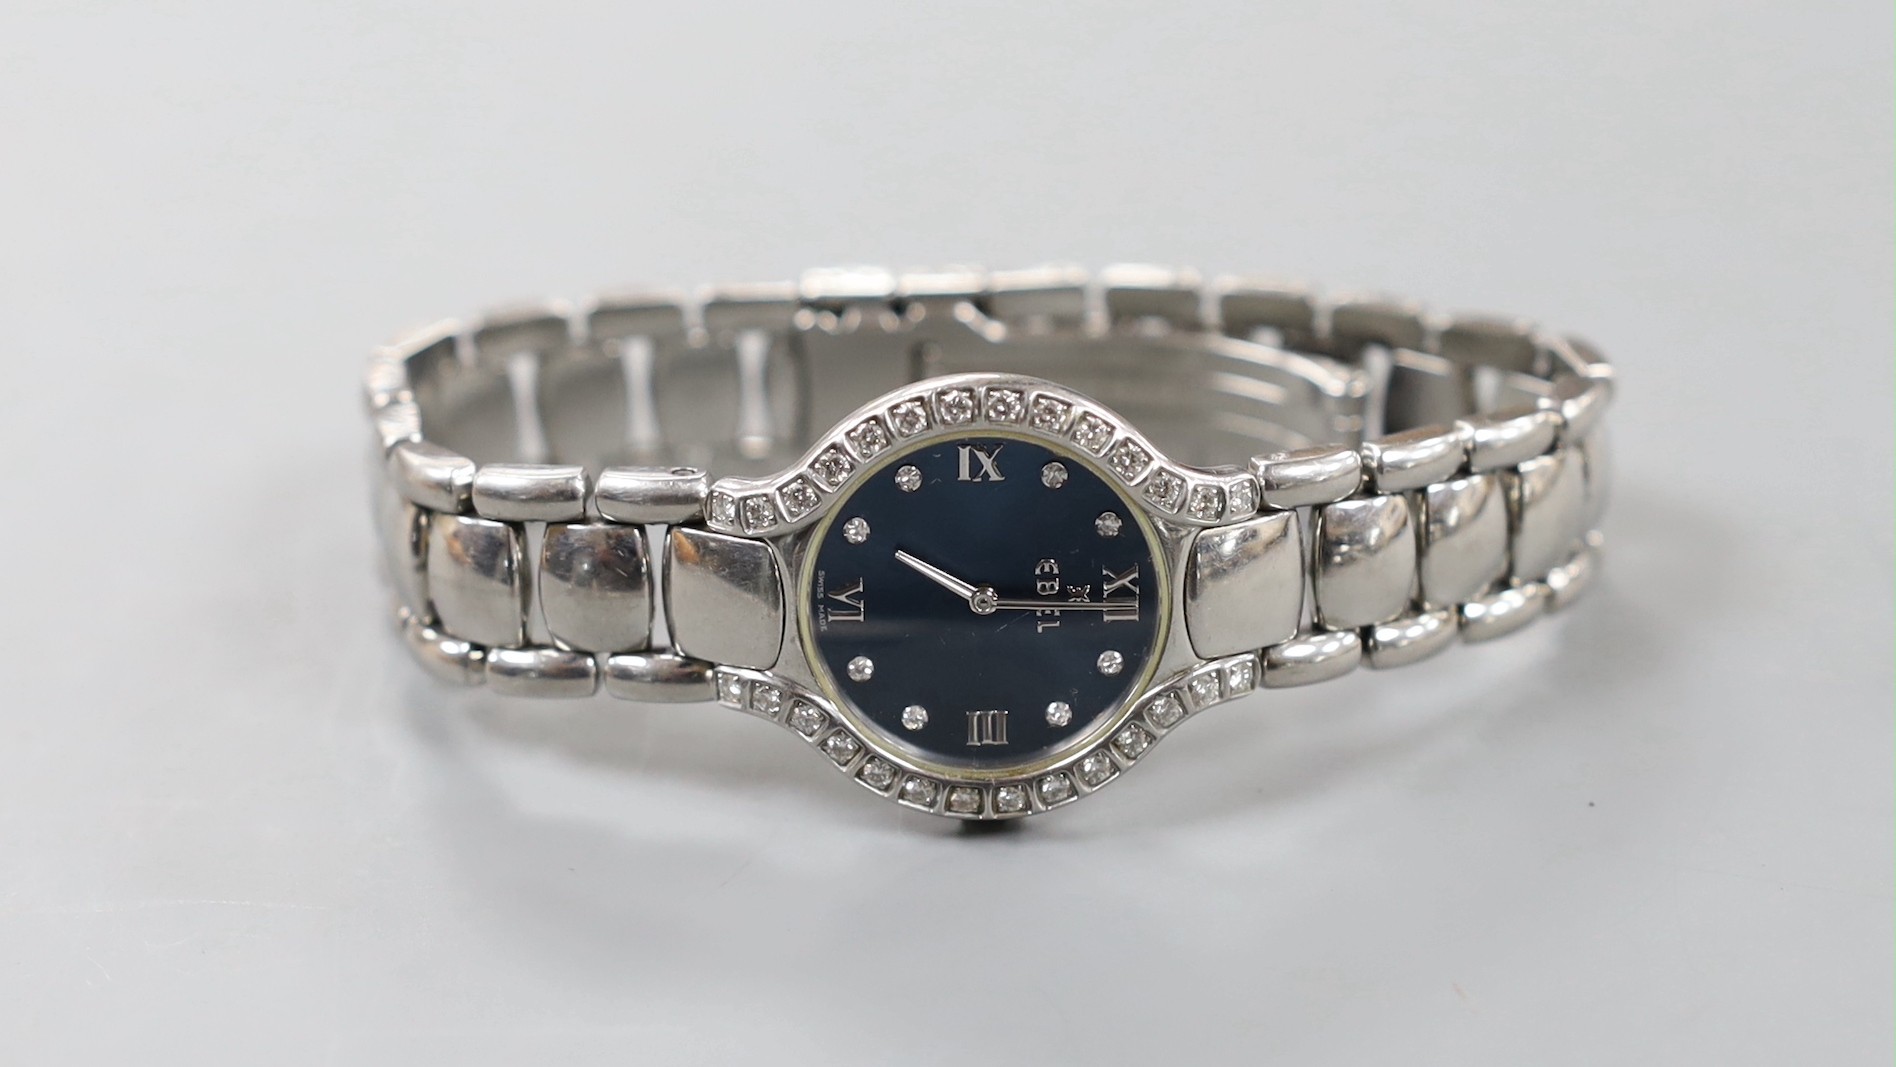 A lady's modern stainless steel Ebel quartz wrist watch and bracelet with diamond set dial and bezel, with box and papers.